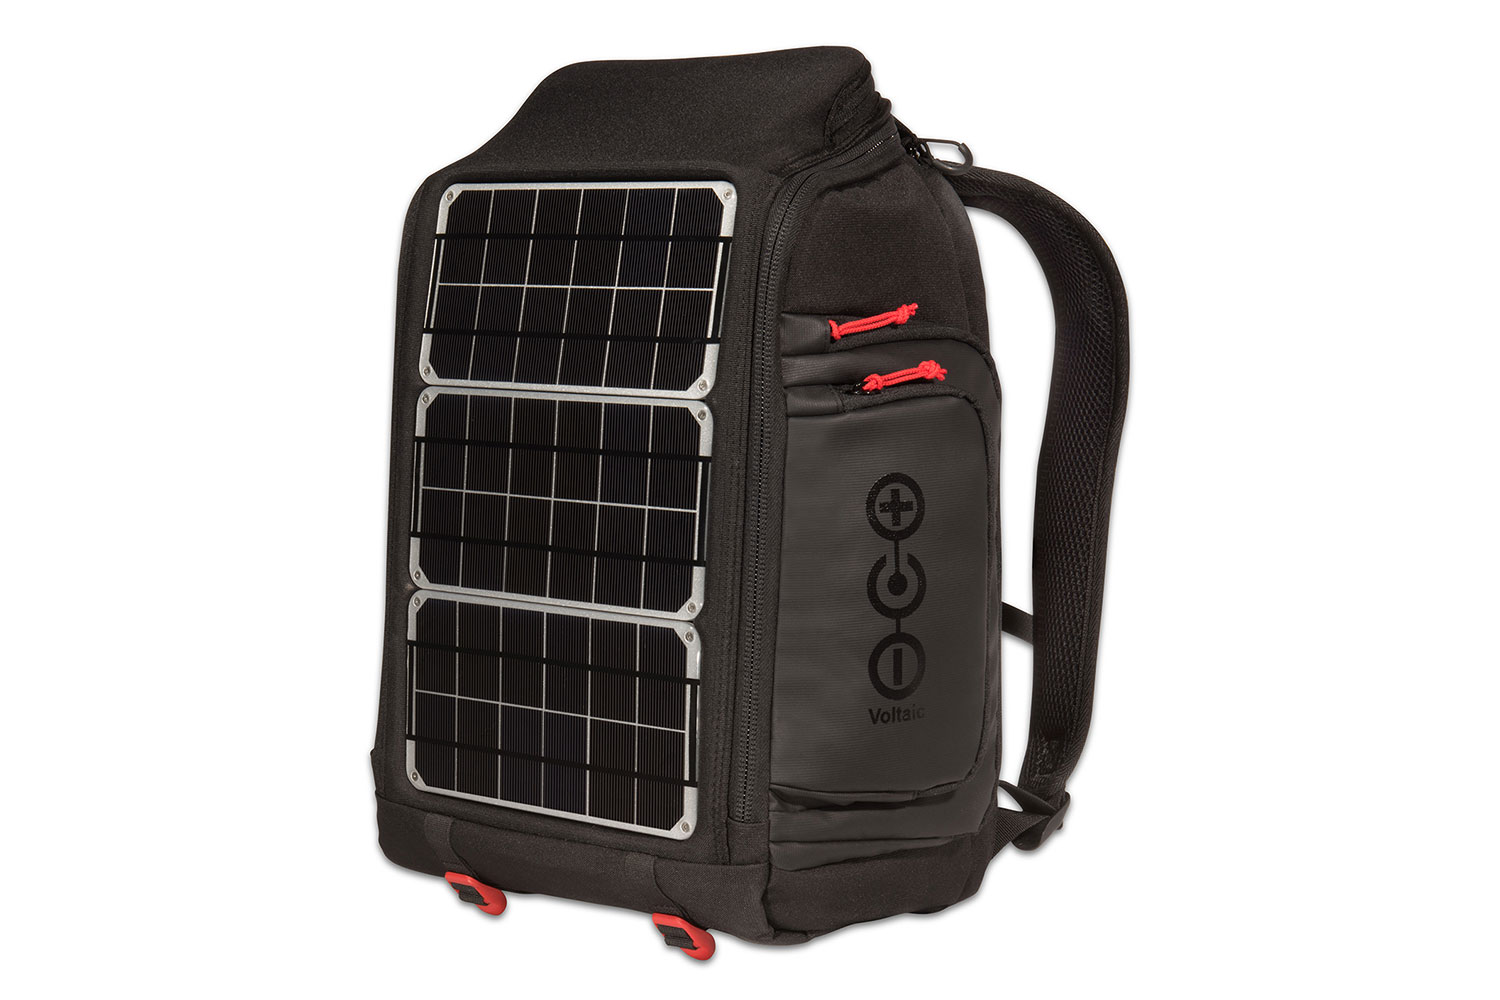 volatic array offgrid voltaic systems solar backpack